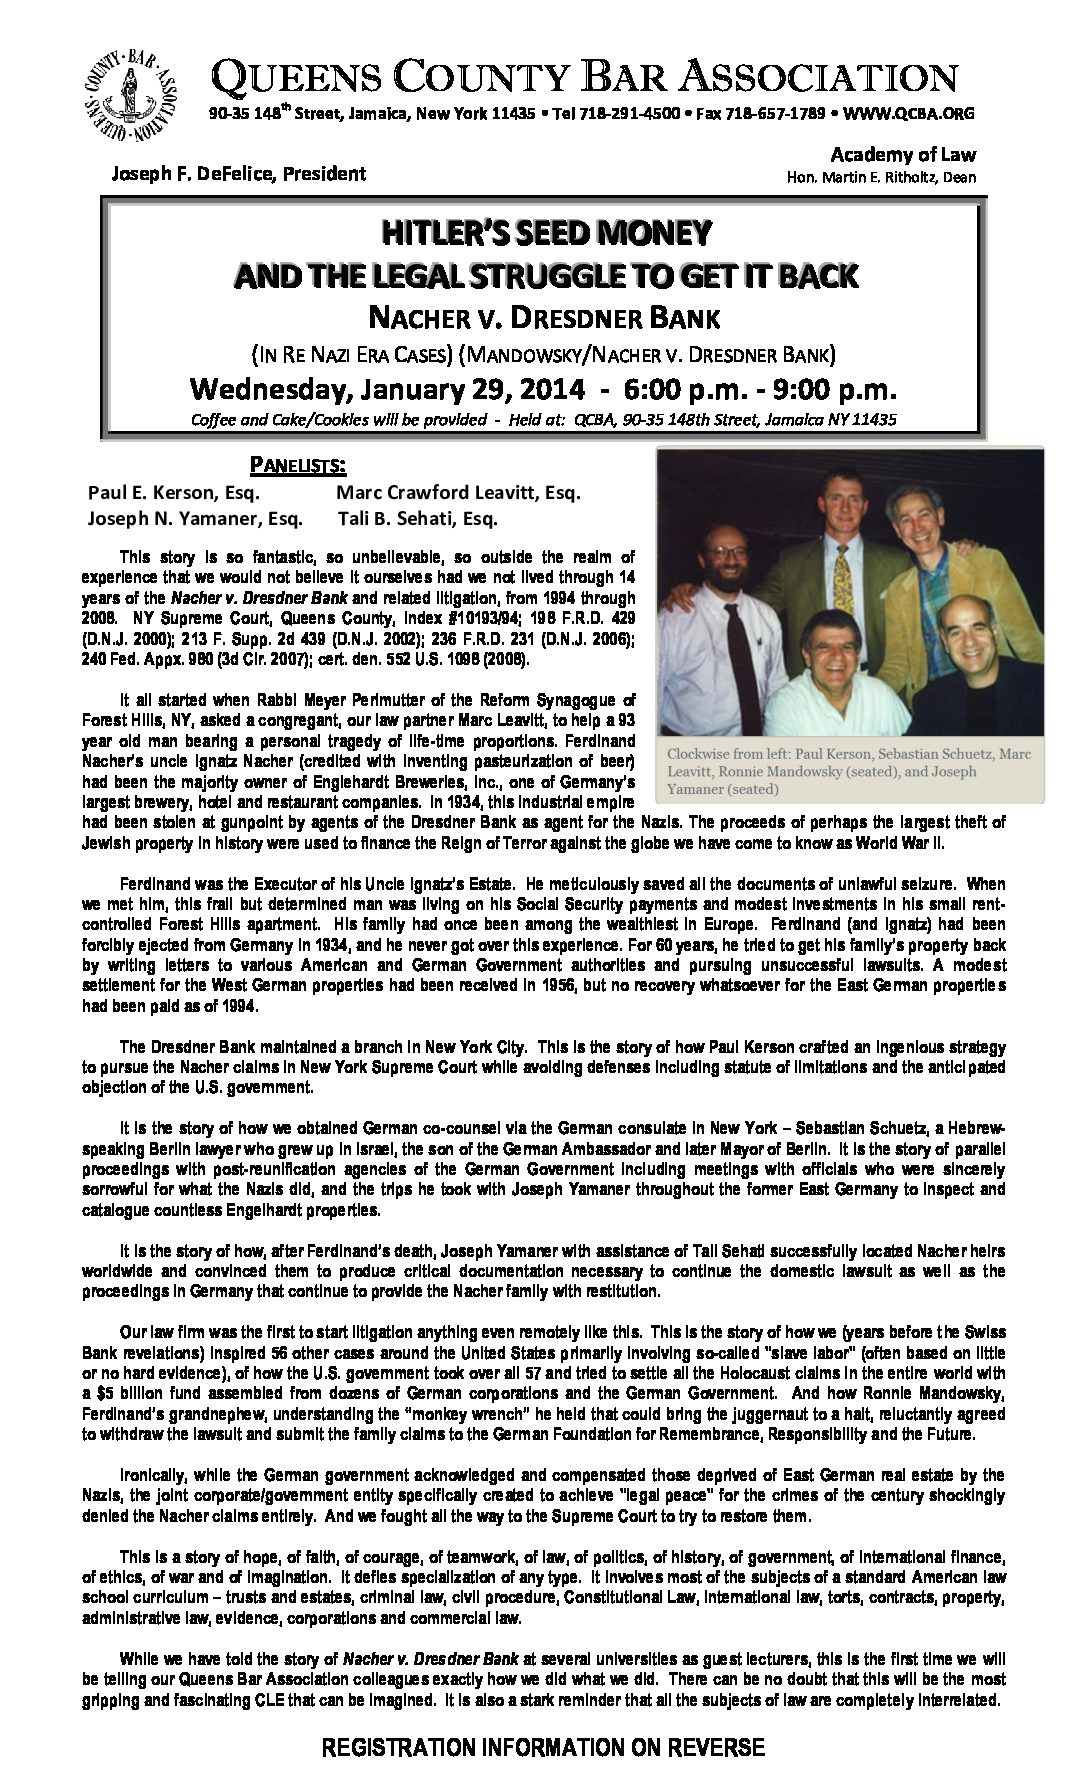 Image of flyer announcing a January 29, 2014 presentation entitled Hitler's Seed Money and The Legal Struggle to Get It Back